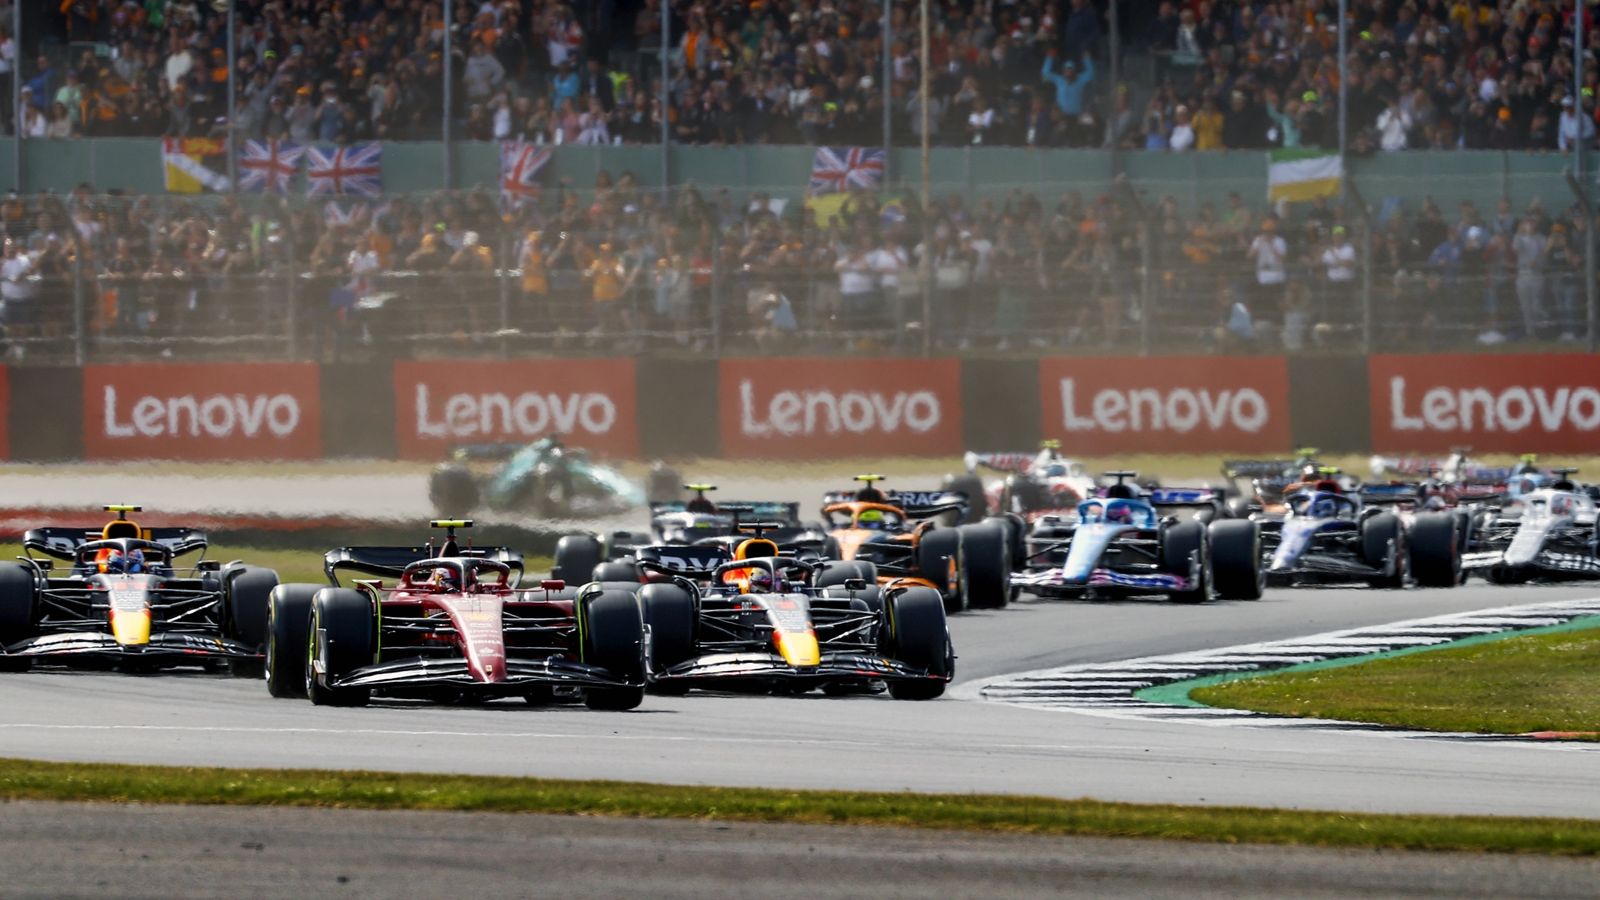 British Grand Prix: Seven arrested after protesters invaded Silverstone track during opening lap - Sky Sports